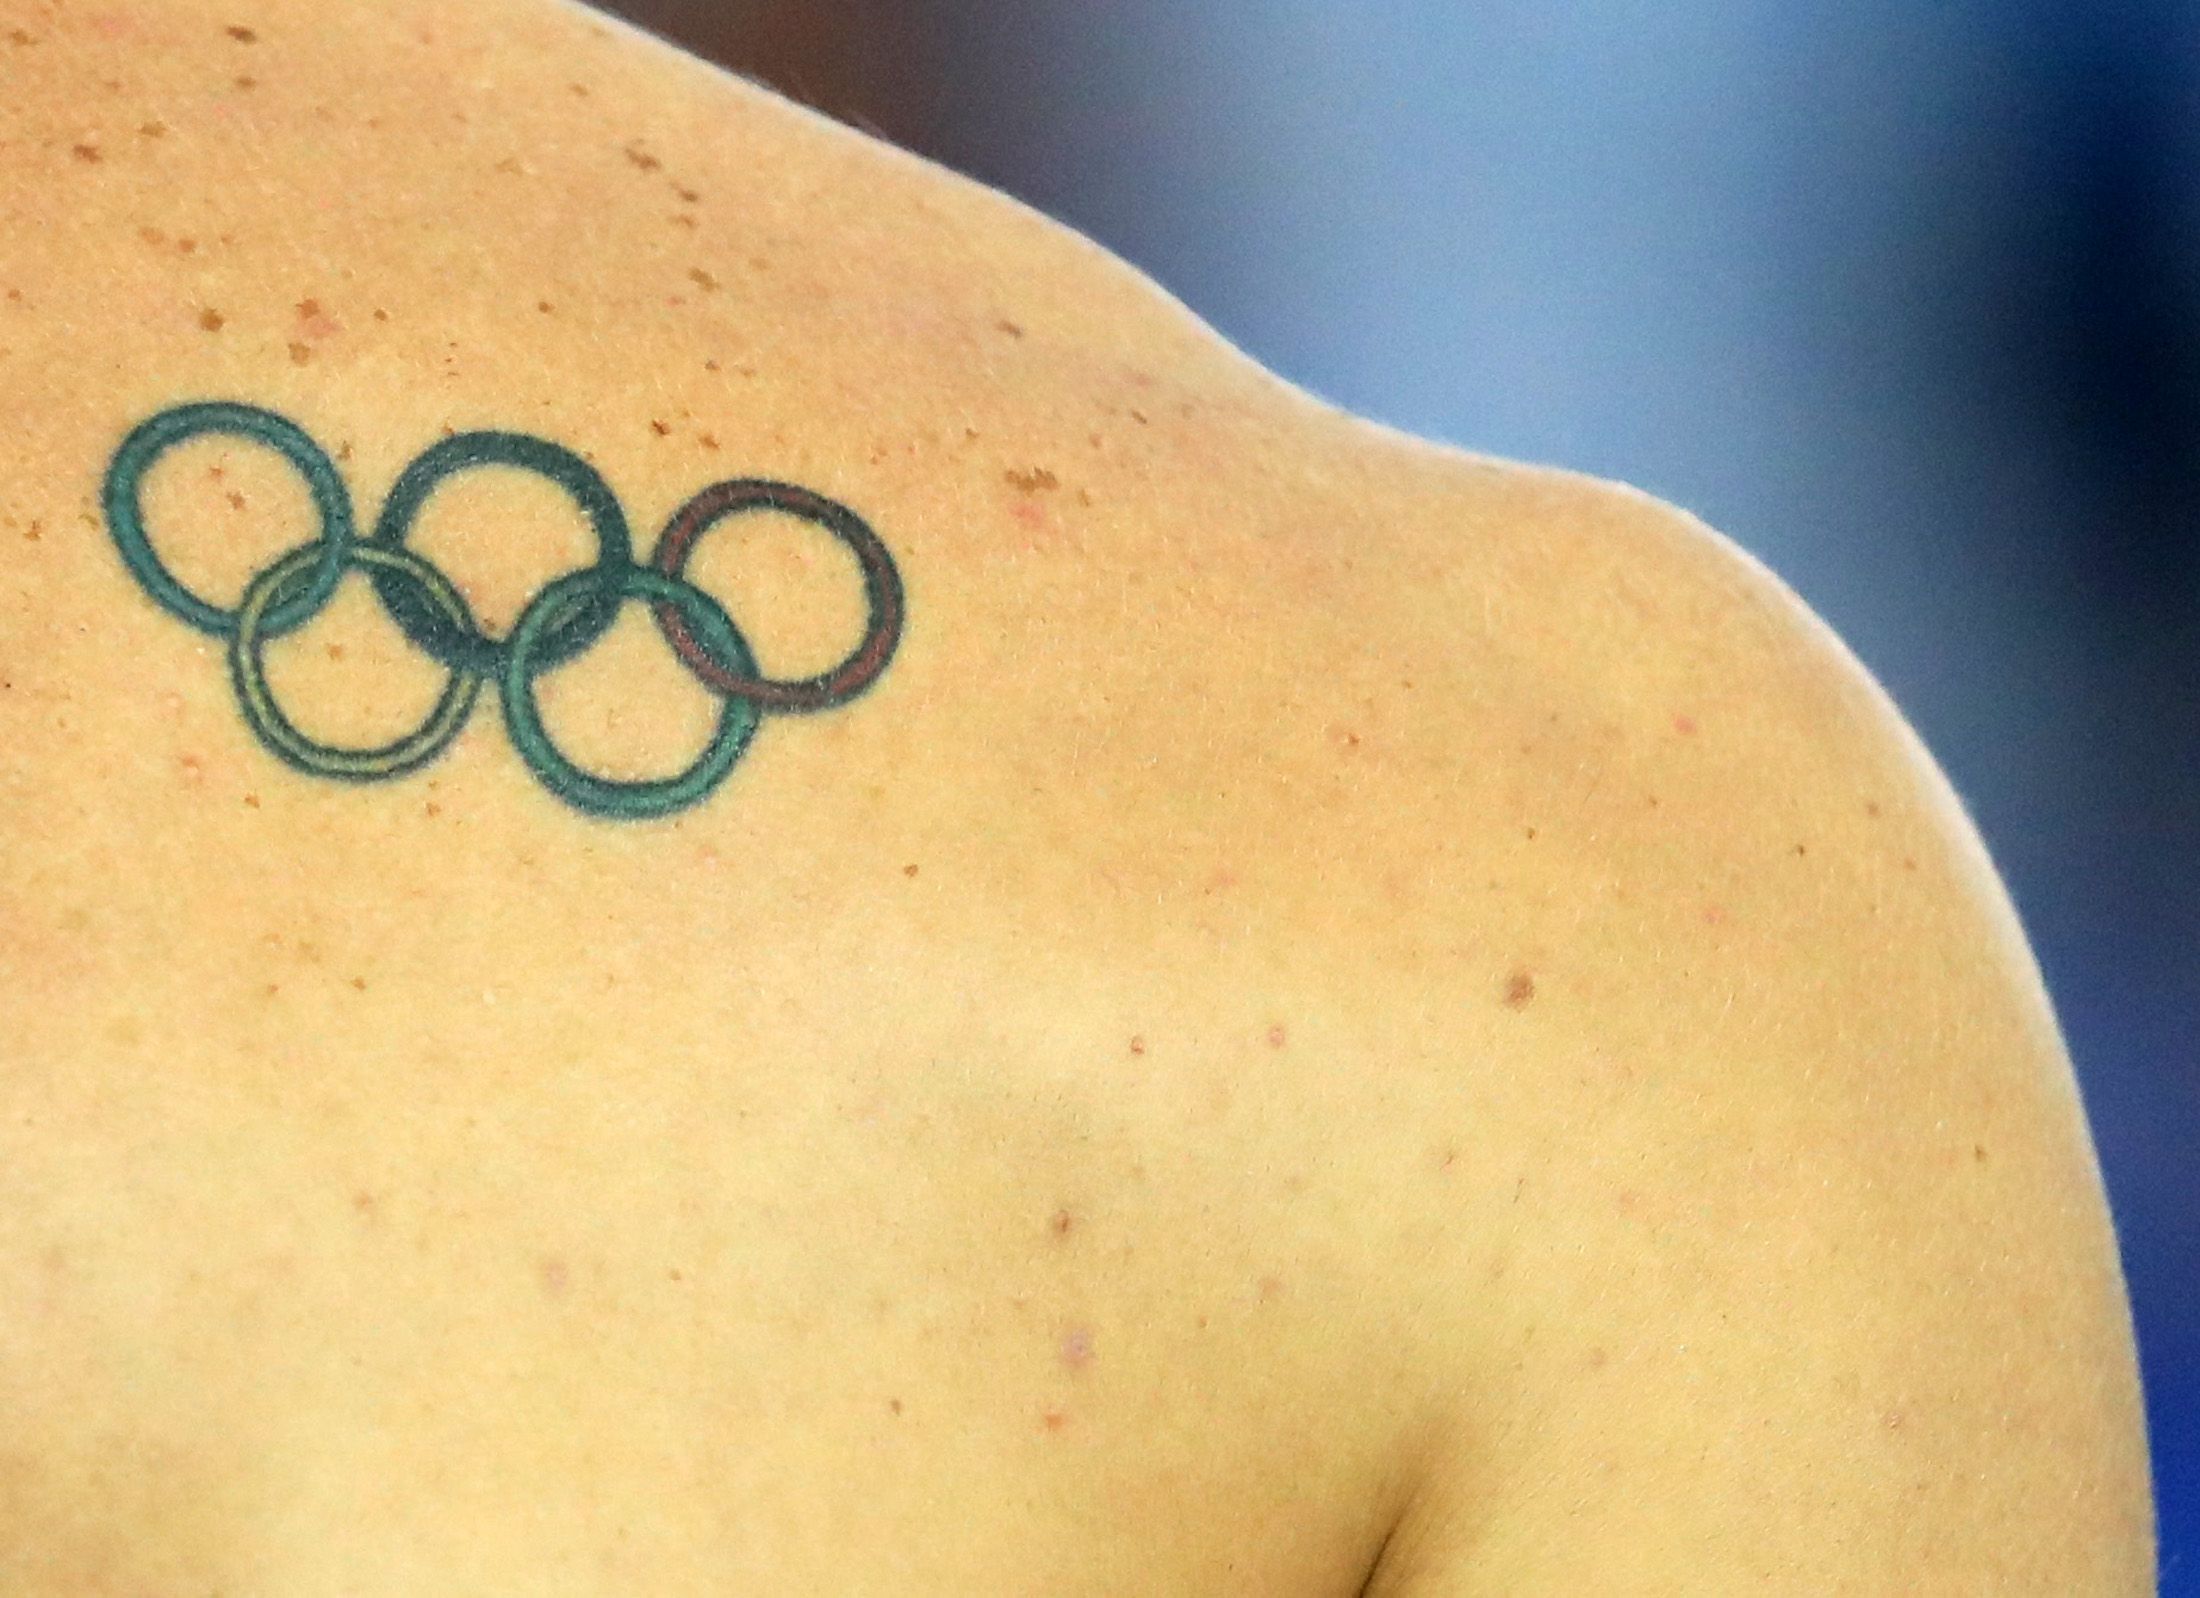 NBC LA - Plenty of Olympic athletes are sporting some sweet ink. Here's a  tattoo on U.S. track cyclist Adam Duvendeck's upper back, shown during the  Beijing 2008 Olympics. Do you have